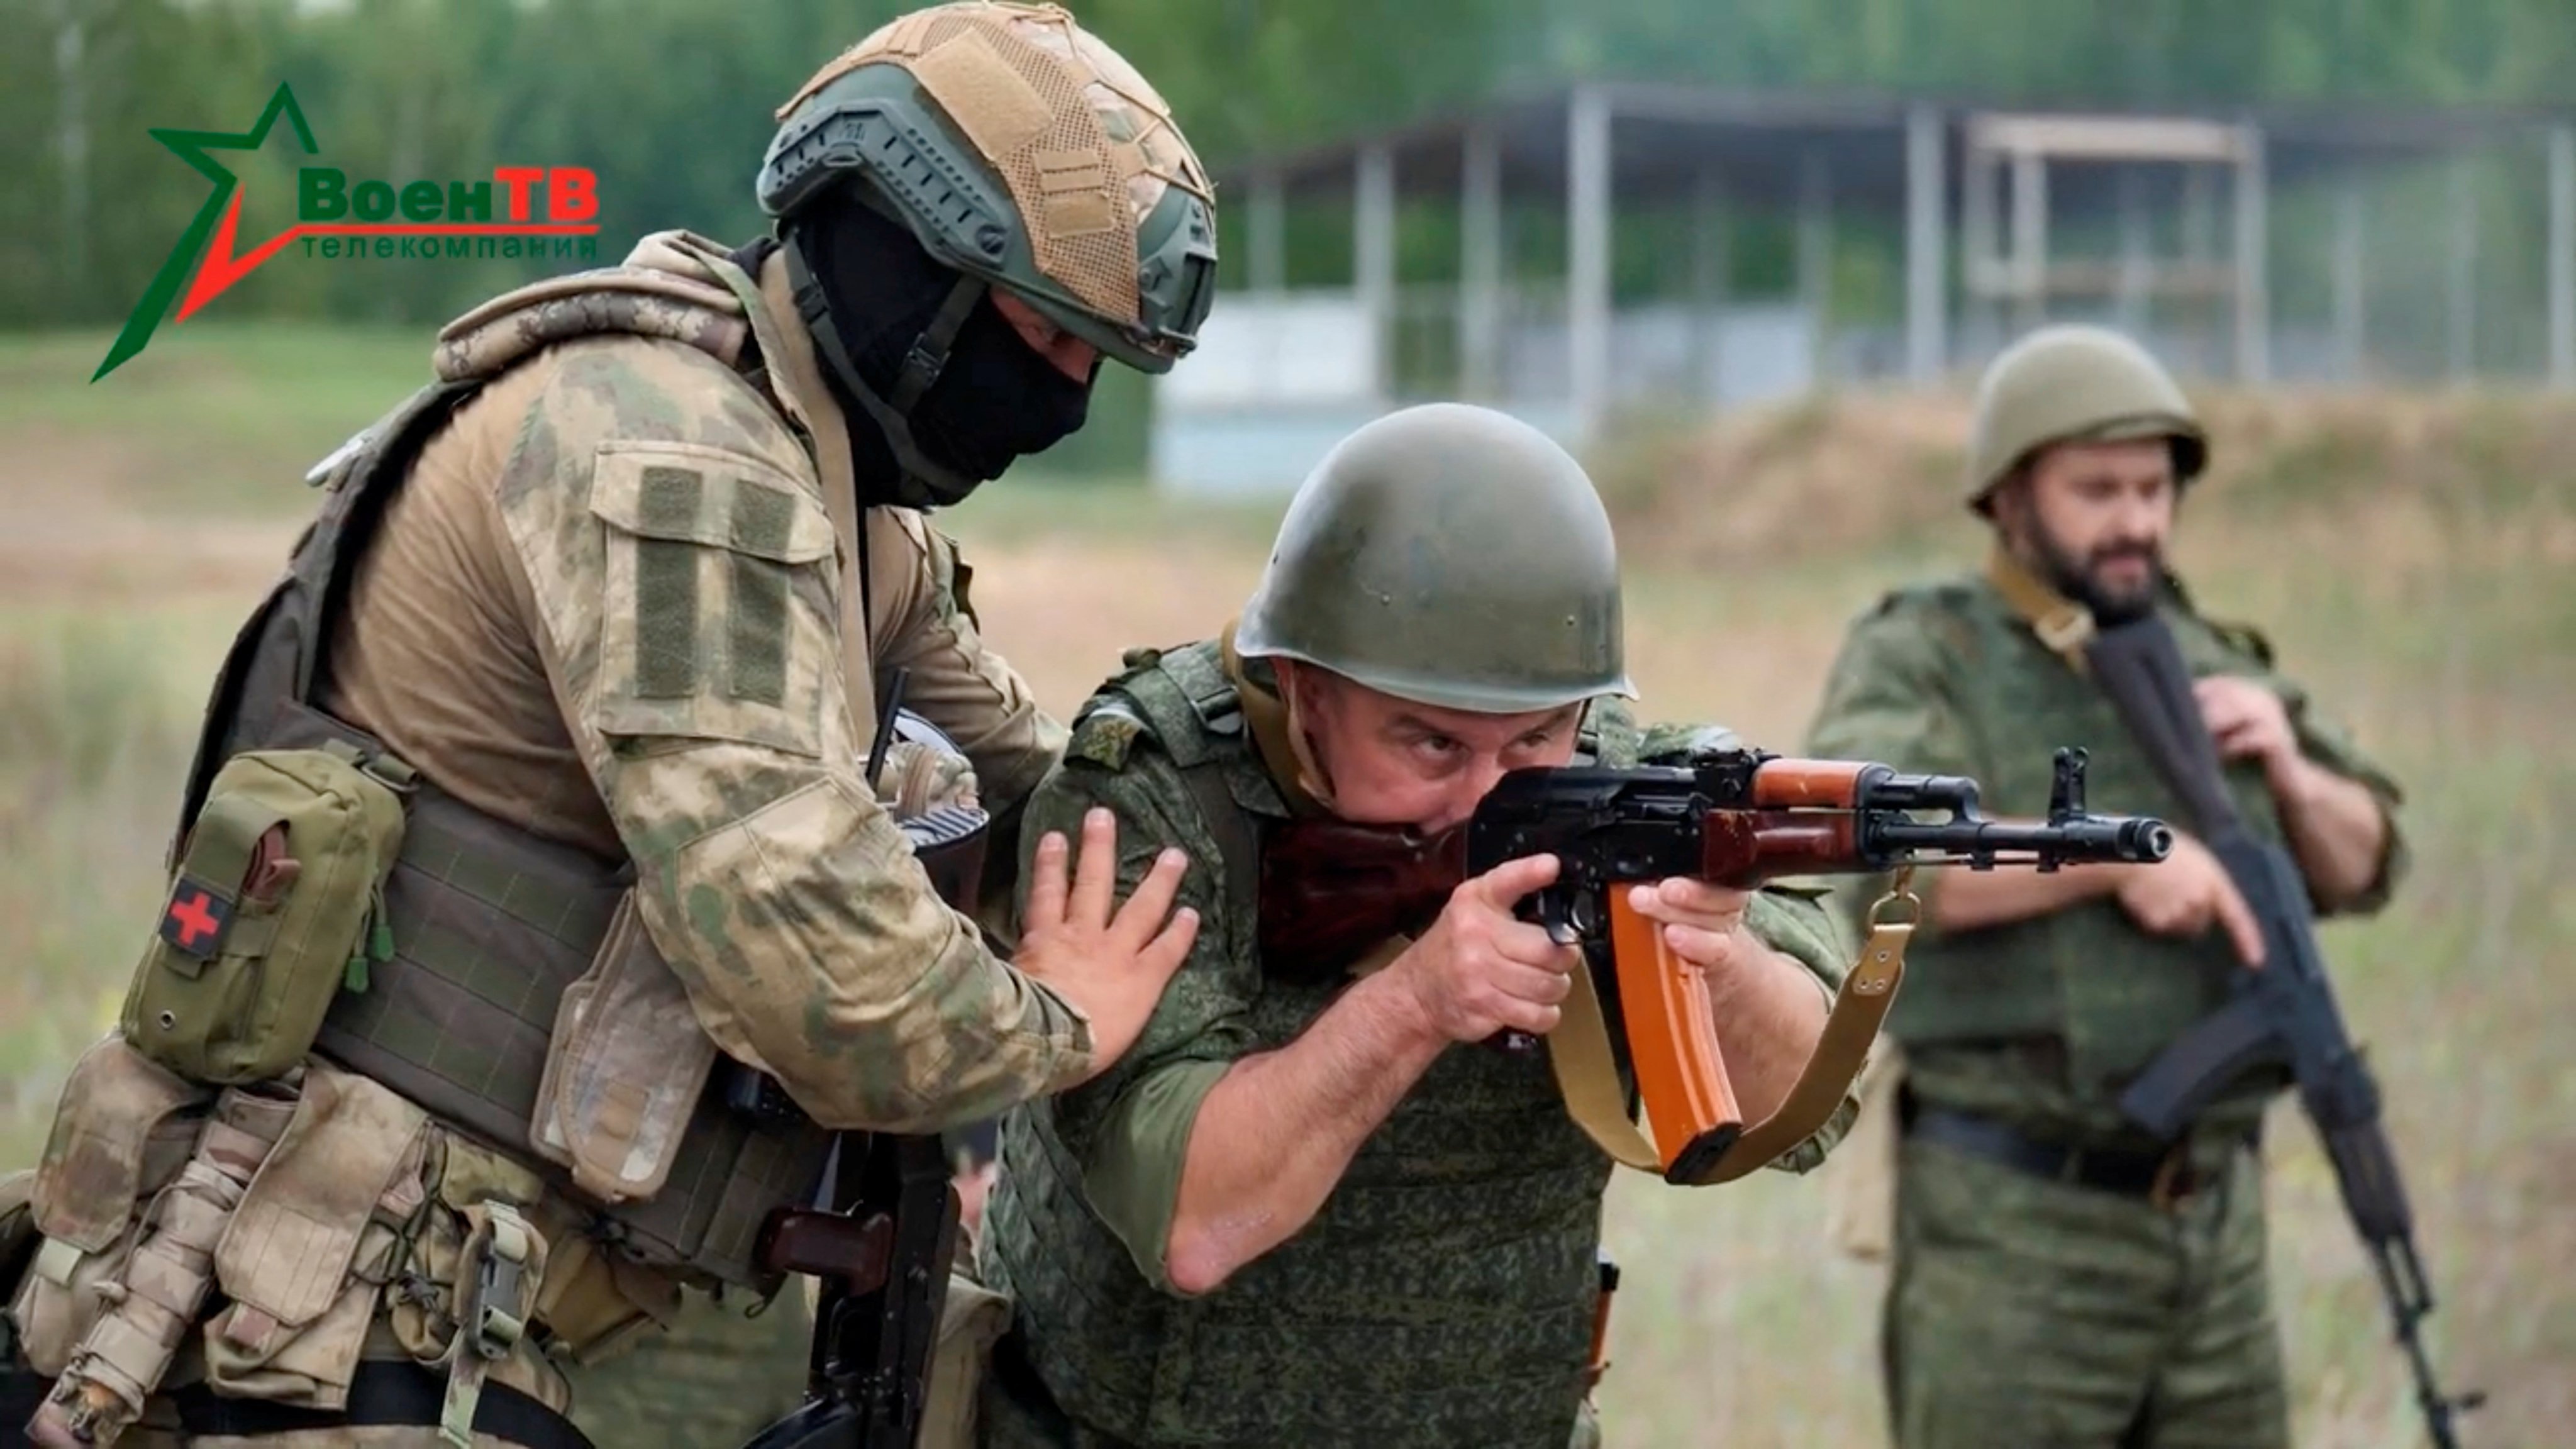 A Wagner Group fighter conducts training for Belarusian soldiers on a range near the town of Osipovichi in Belarus on Friday. Photo: Voen Tv/Belarusian Defence Ministry via Reuters